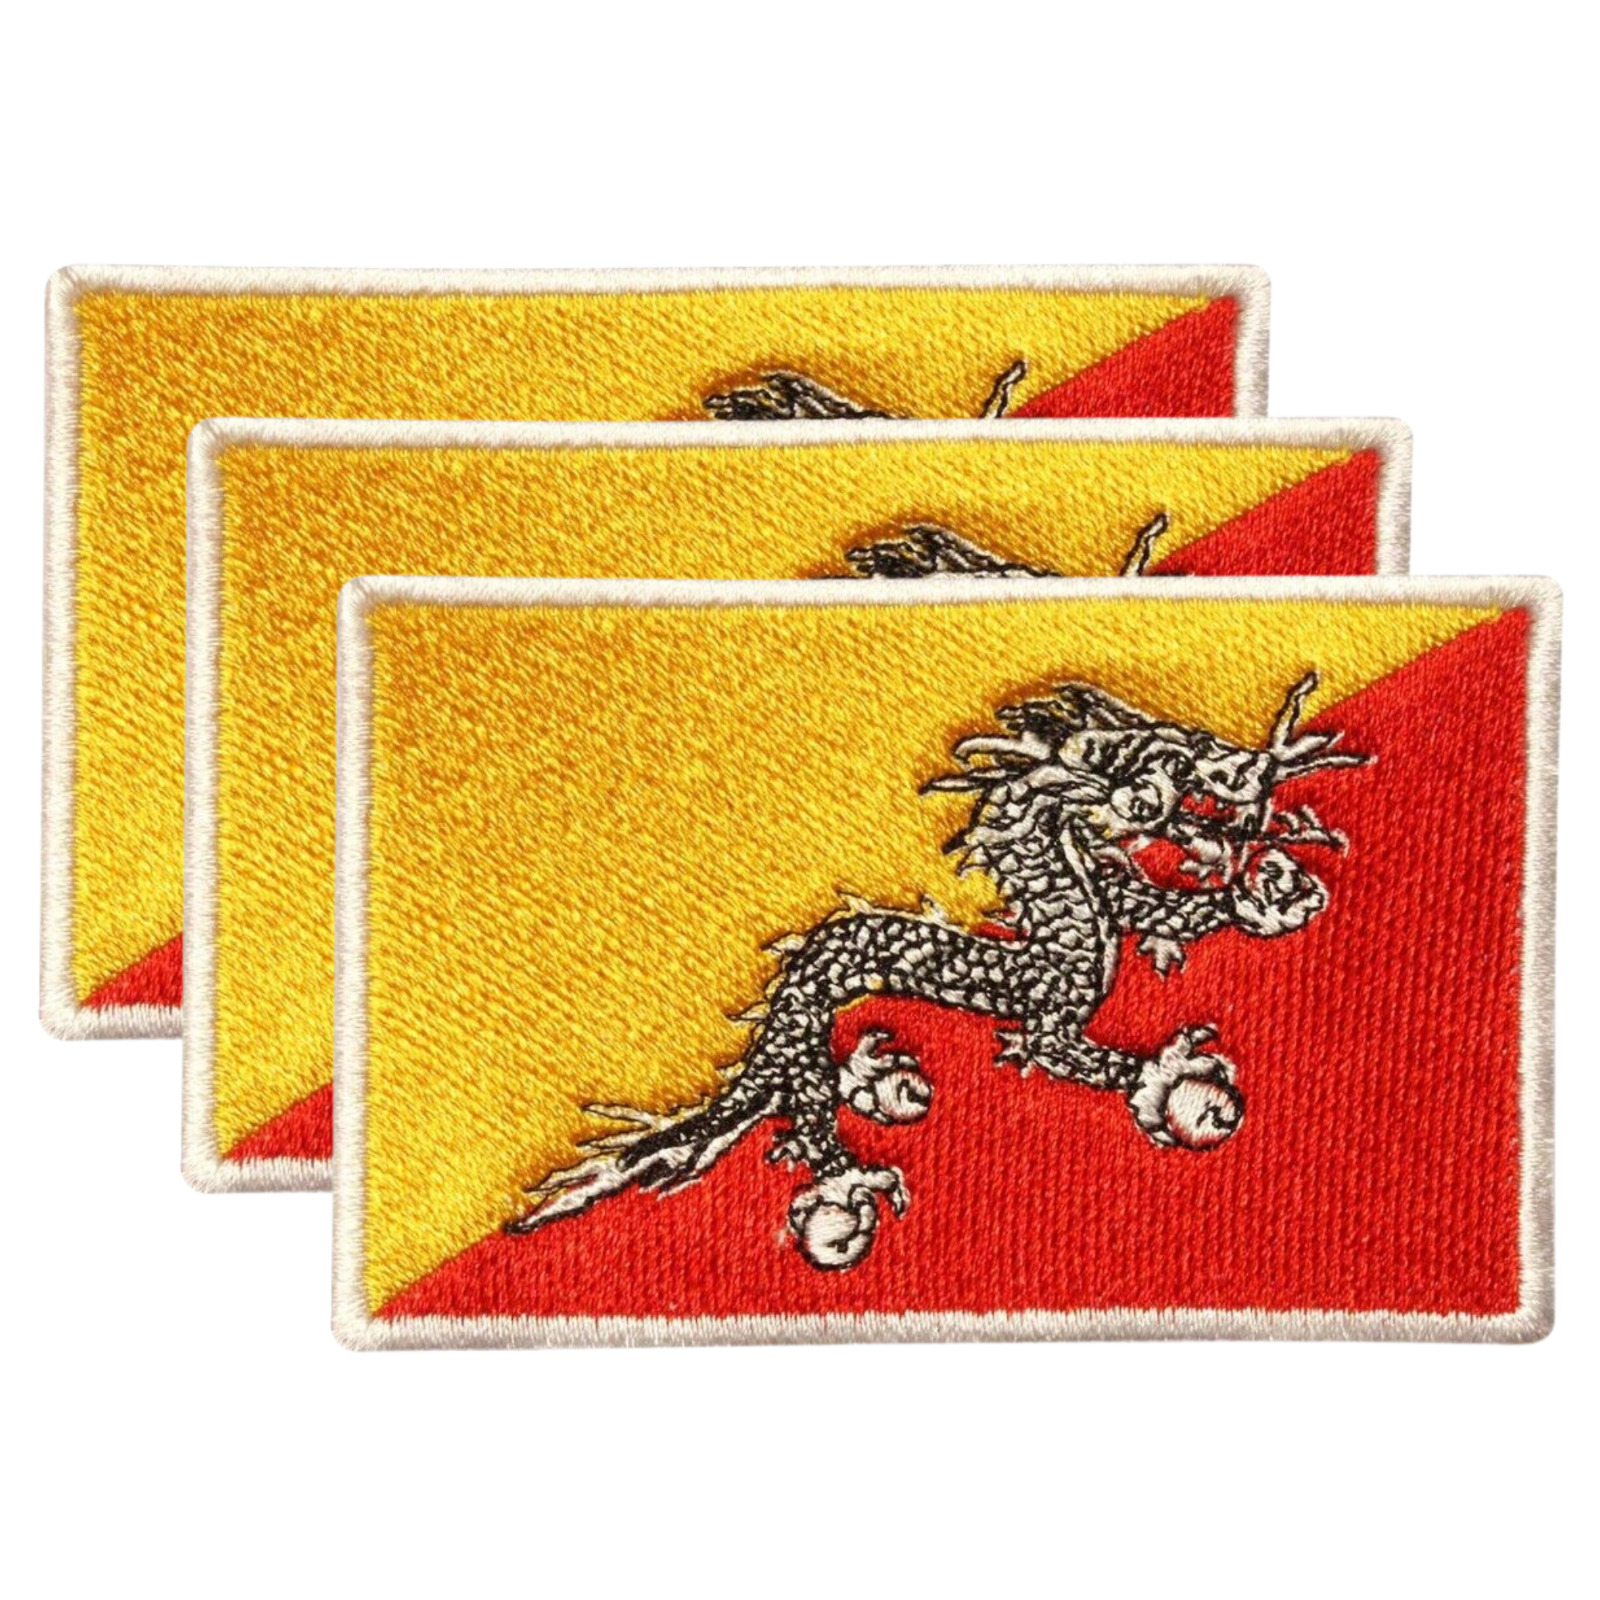 Bhutan International Country Flag Iron On Patch Embroidered Sew On Badge x3